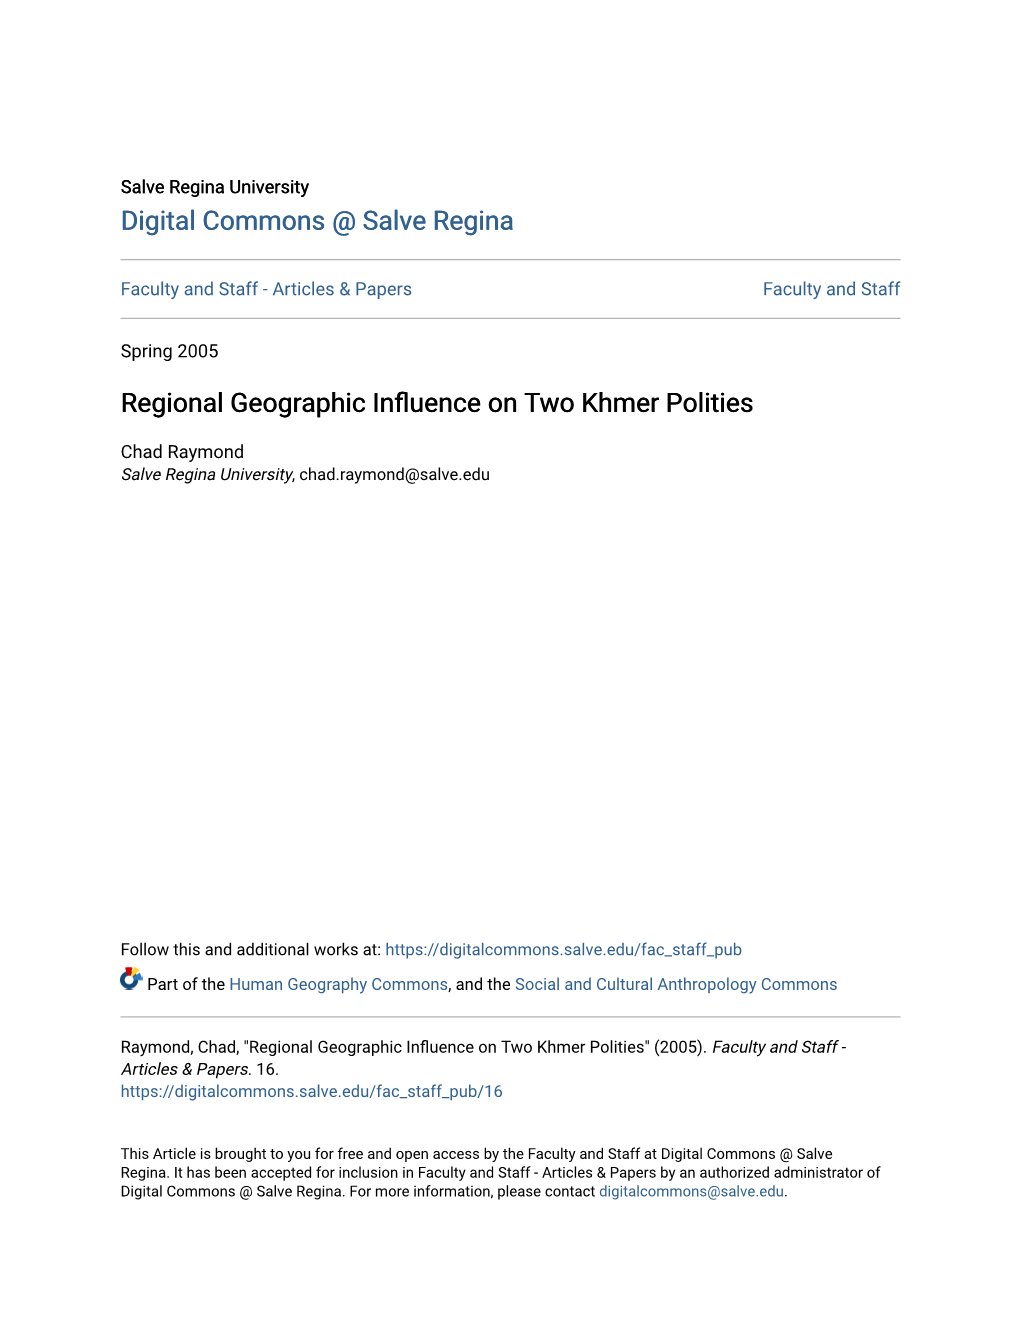 REGIONAL GEOGRAPHIC INFLUENCE on TWO KHMER POLITIES by Chad Raymond*